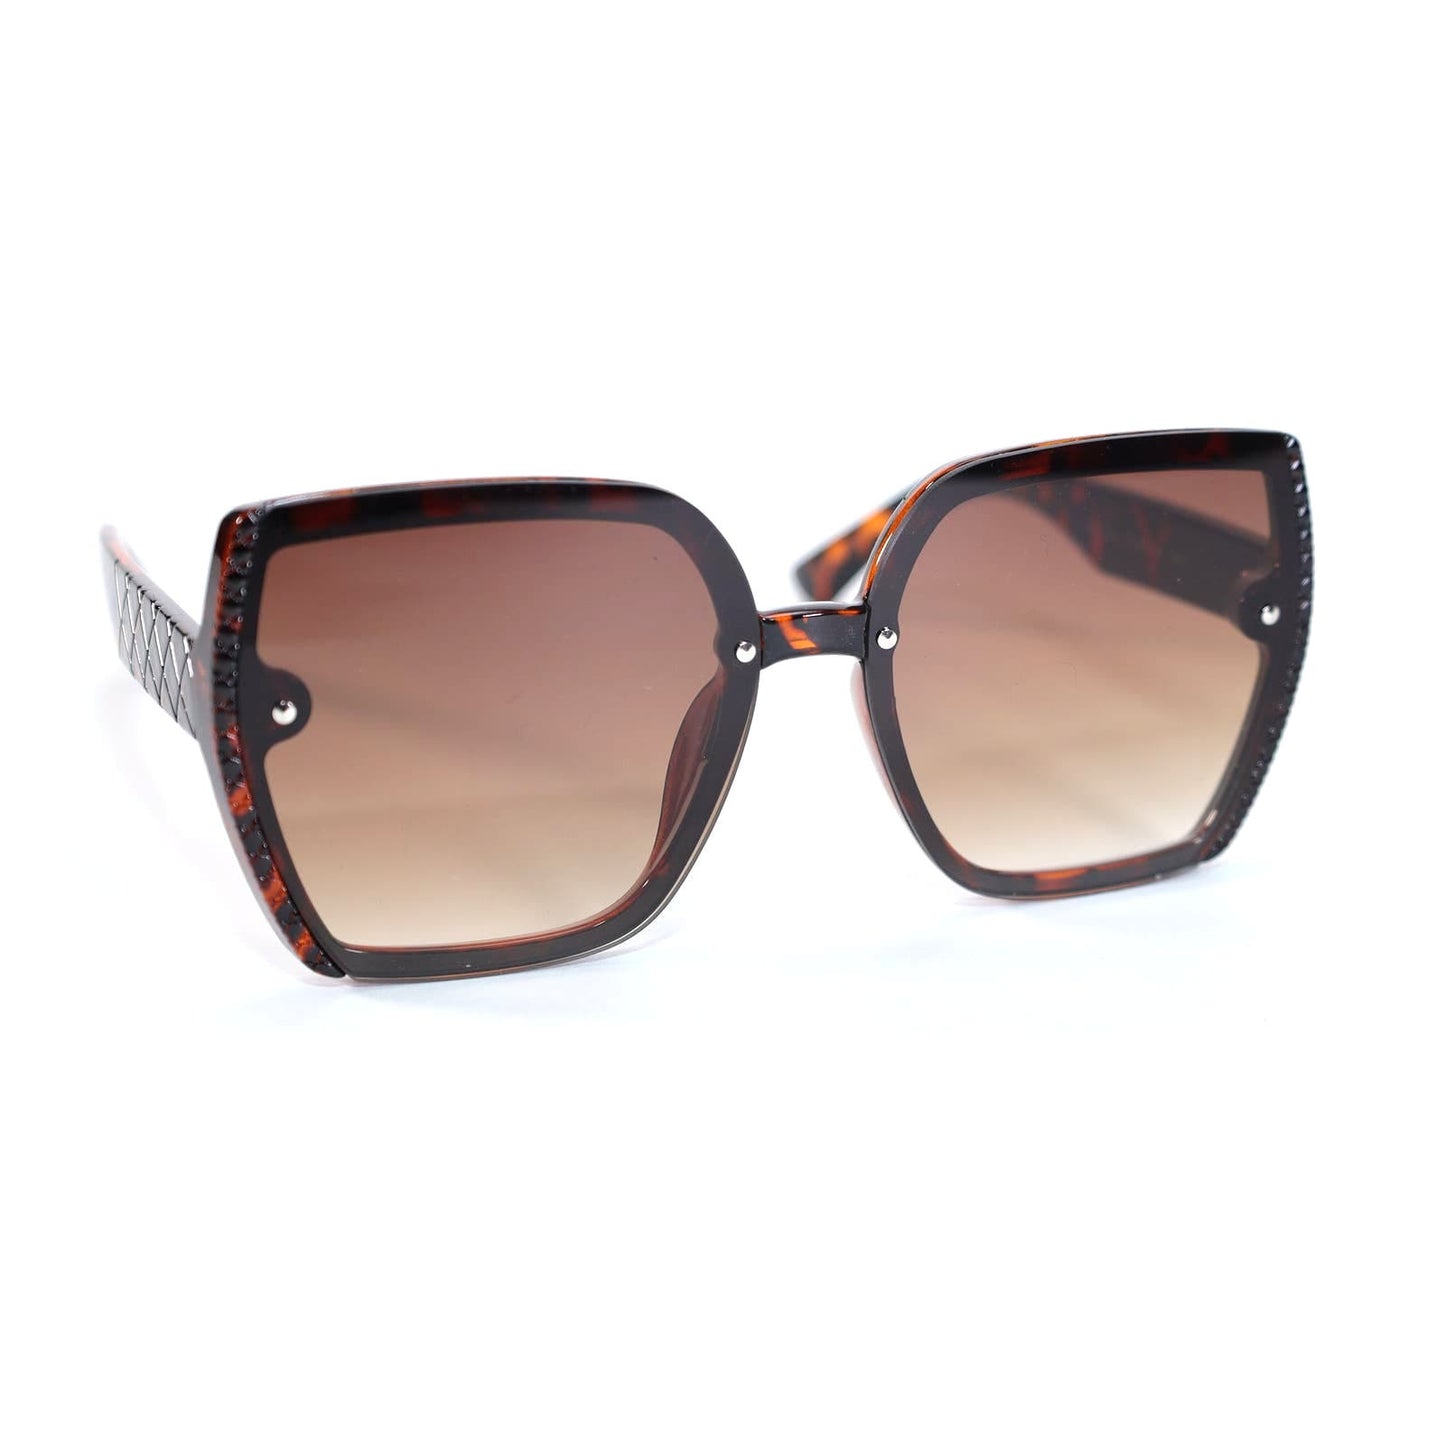 Vince Camuto Oversized Geometric Sunglassses - Brown/Brown Gradient